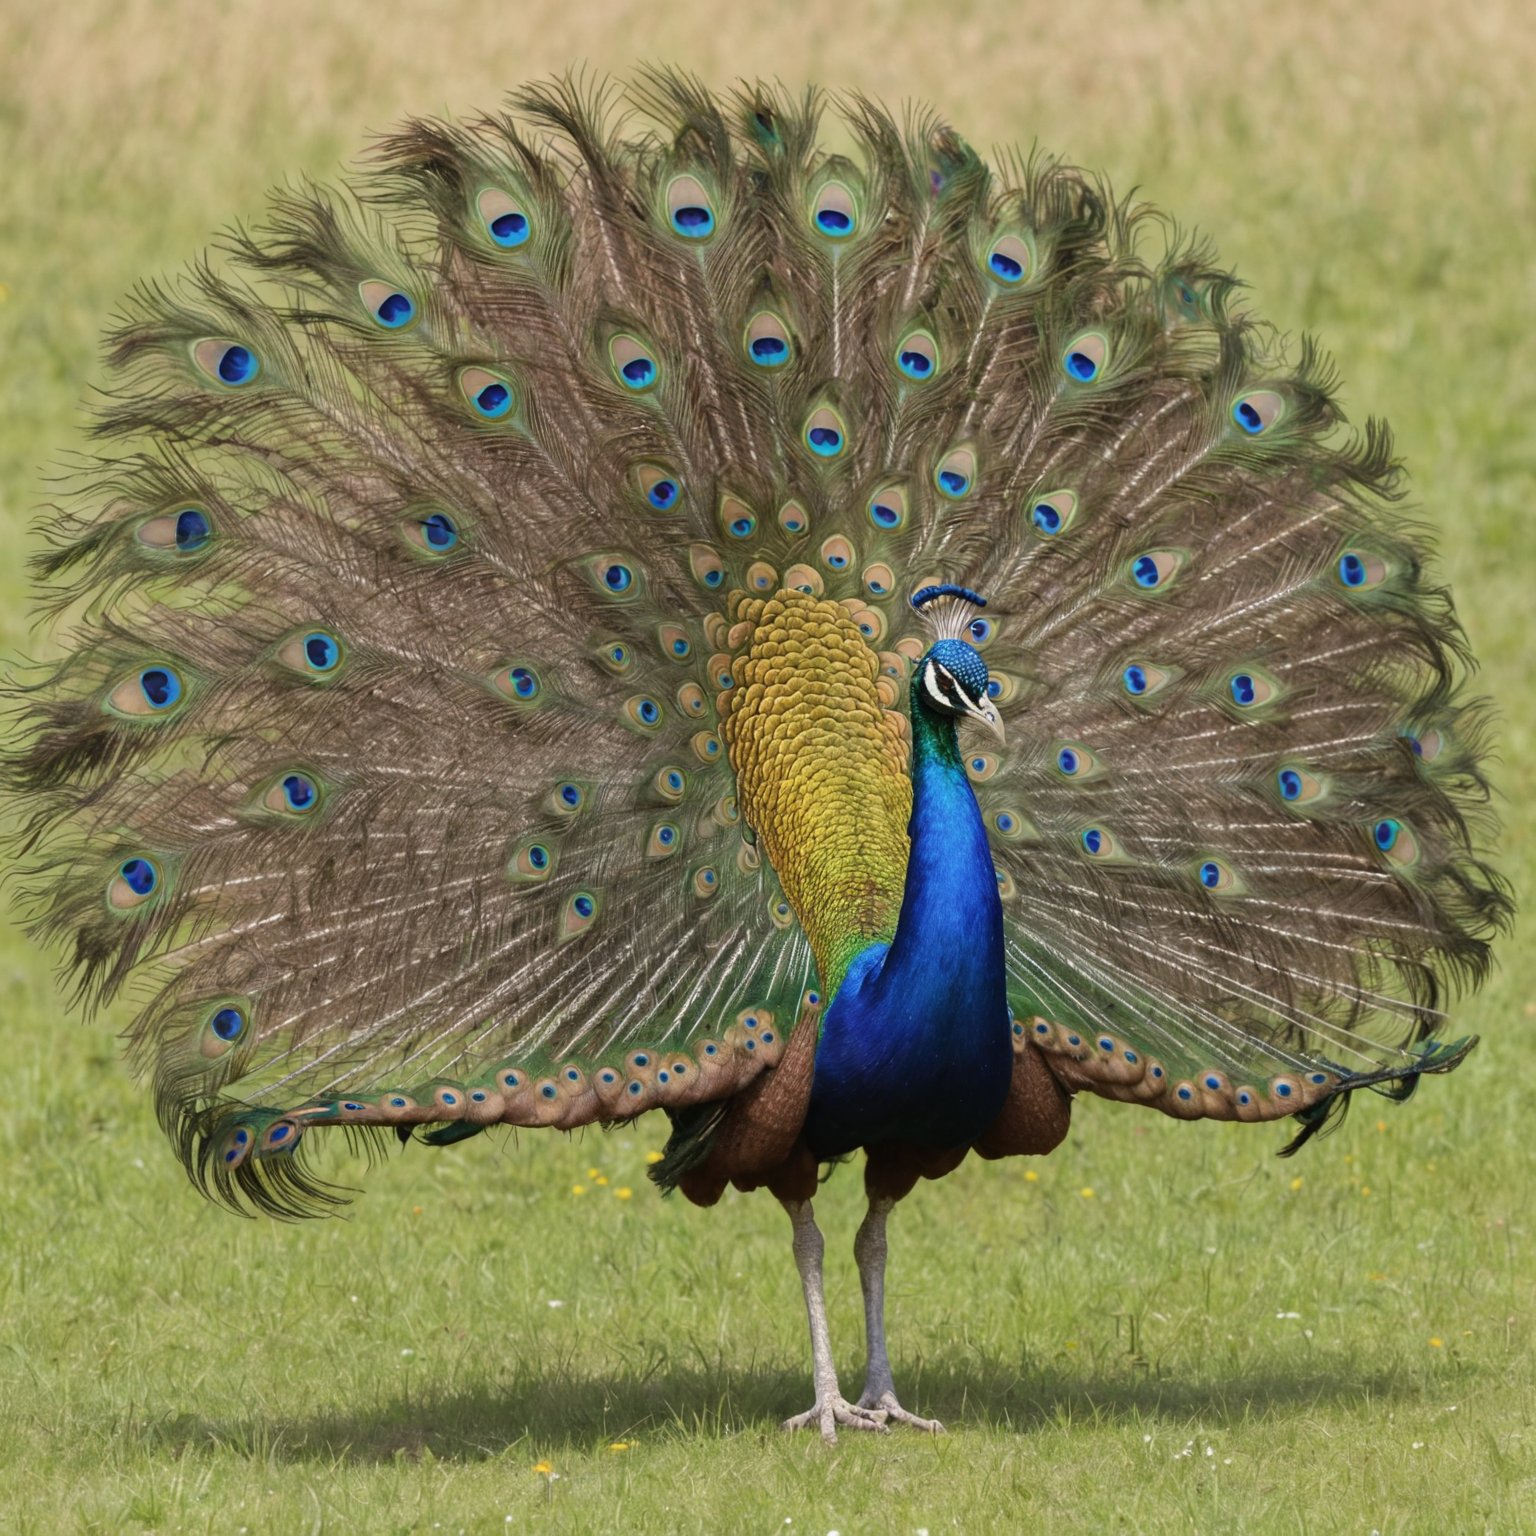 cinematic photo of a vibrant and colorful peacock strutting in the meadow, full fluffy feathers, intricate detail